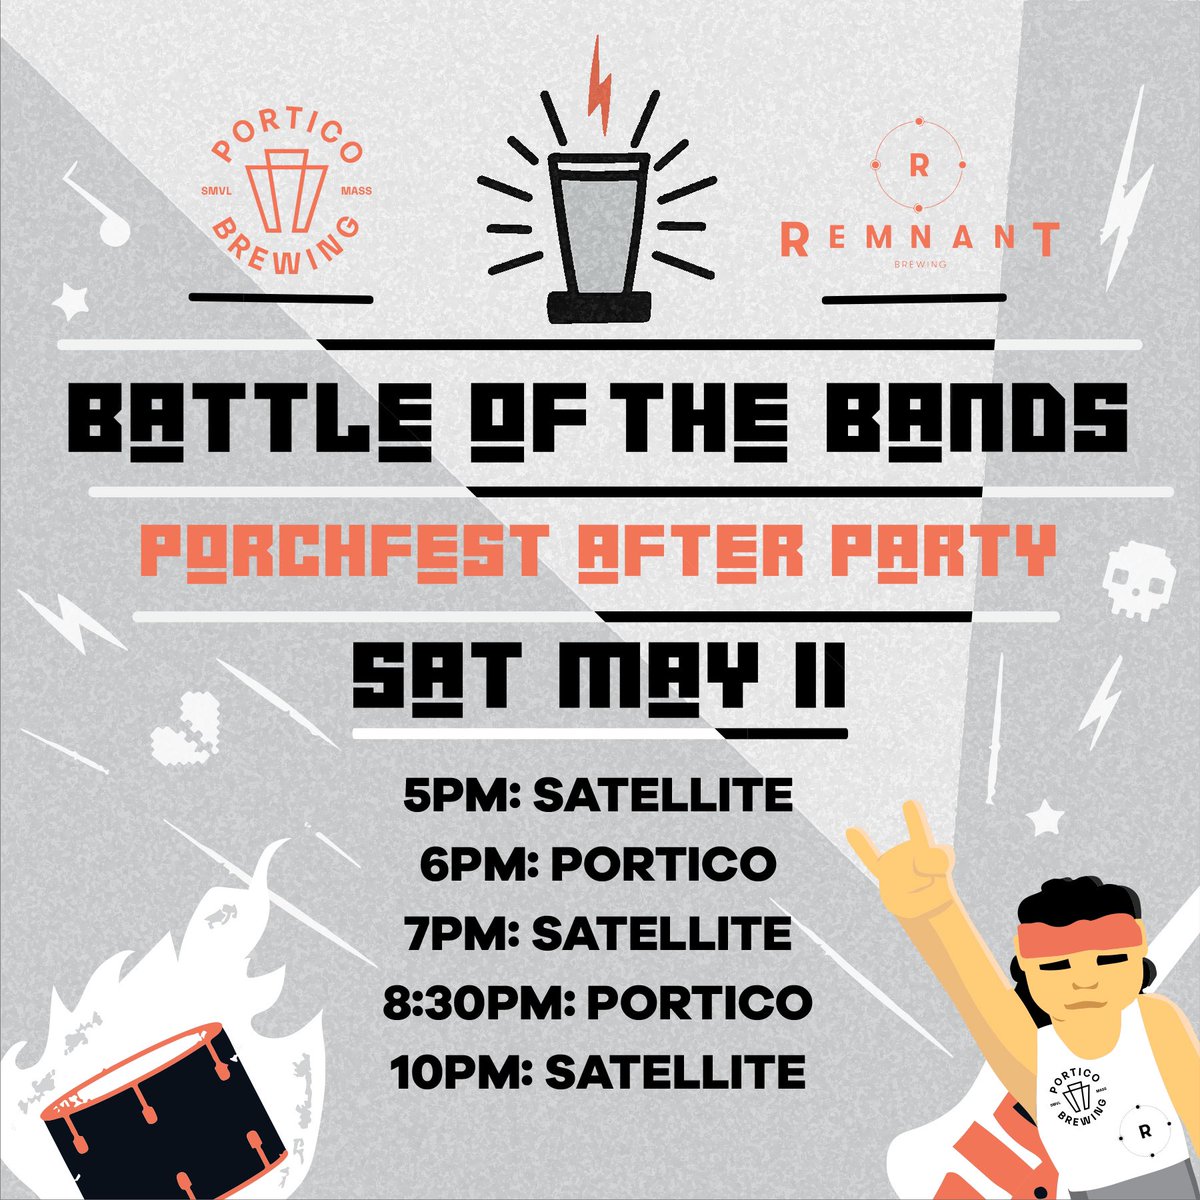 Hi. We’ve been a little cagey about our plans for #SomervillePorchfest this year because we were working on something cool. That cool something is this! We’re the 10pm band. Let’s dare to be stupid. See you there for the afterparty! @remnantbrewing @PorticoBrewing